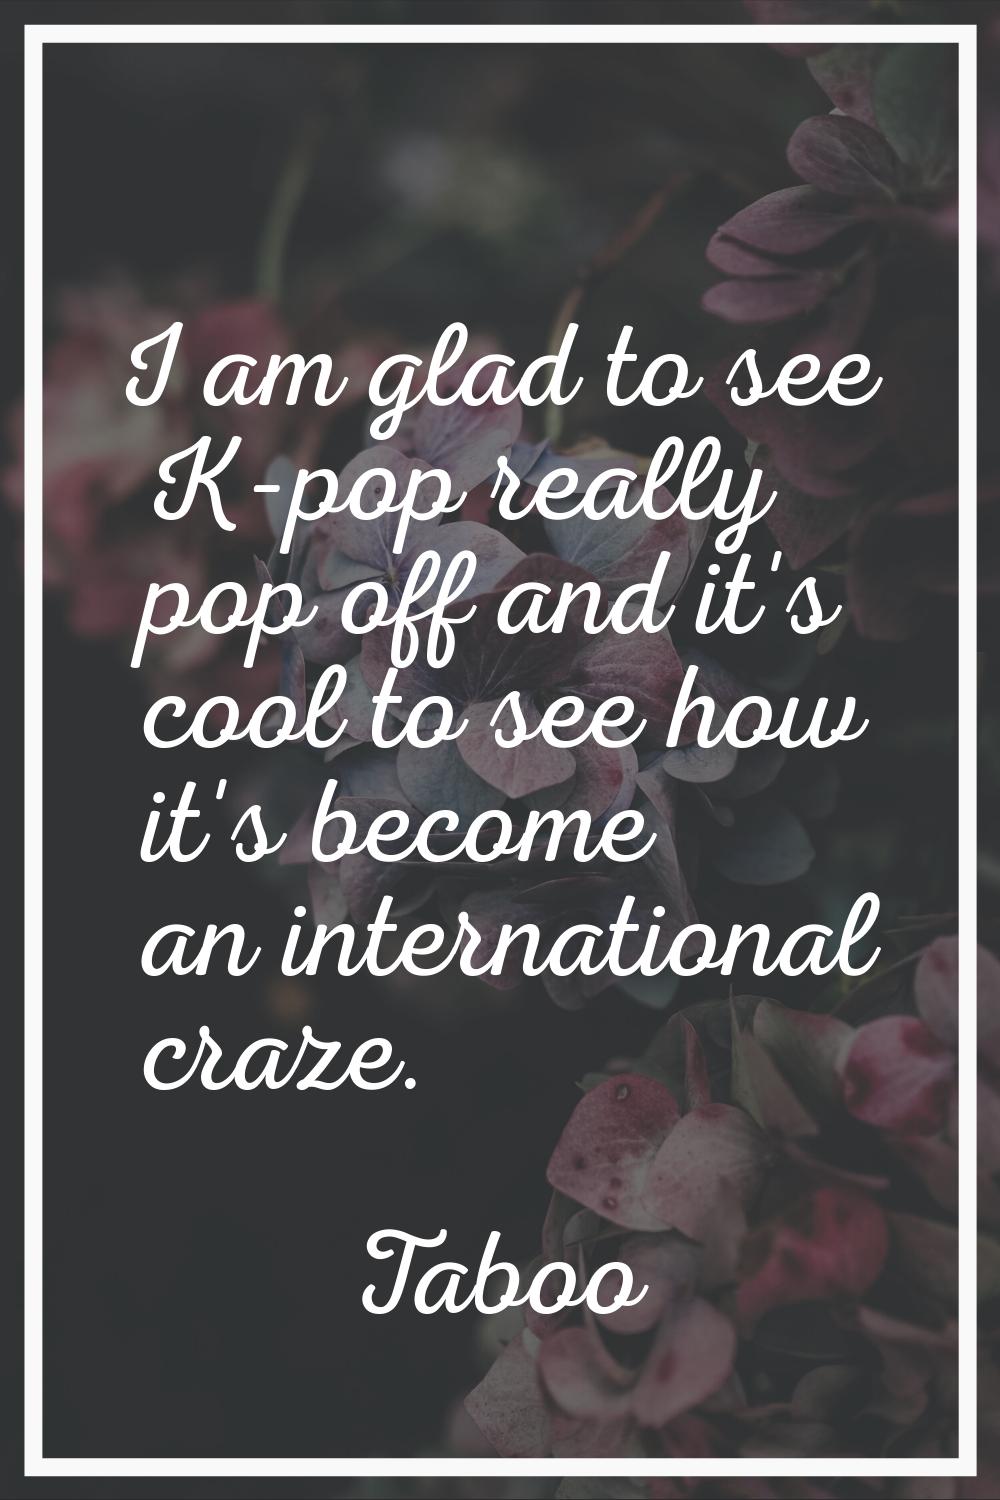 I am glad to see K-pop really pop off and it's cool to see how it's become an international craze.